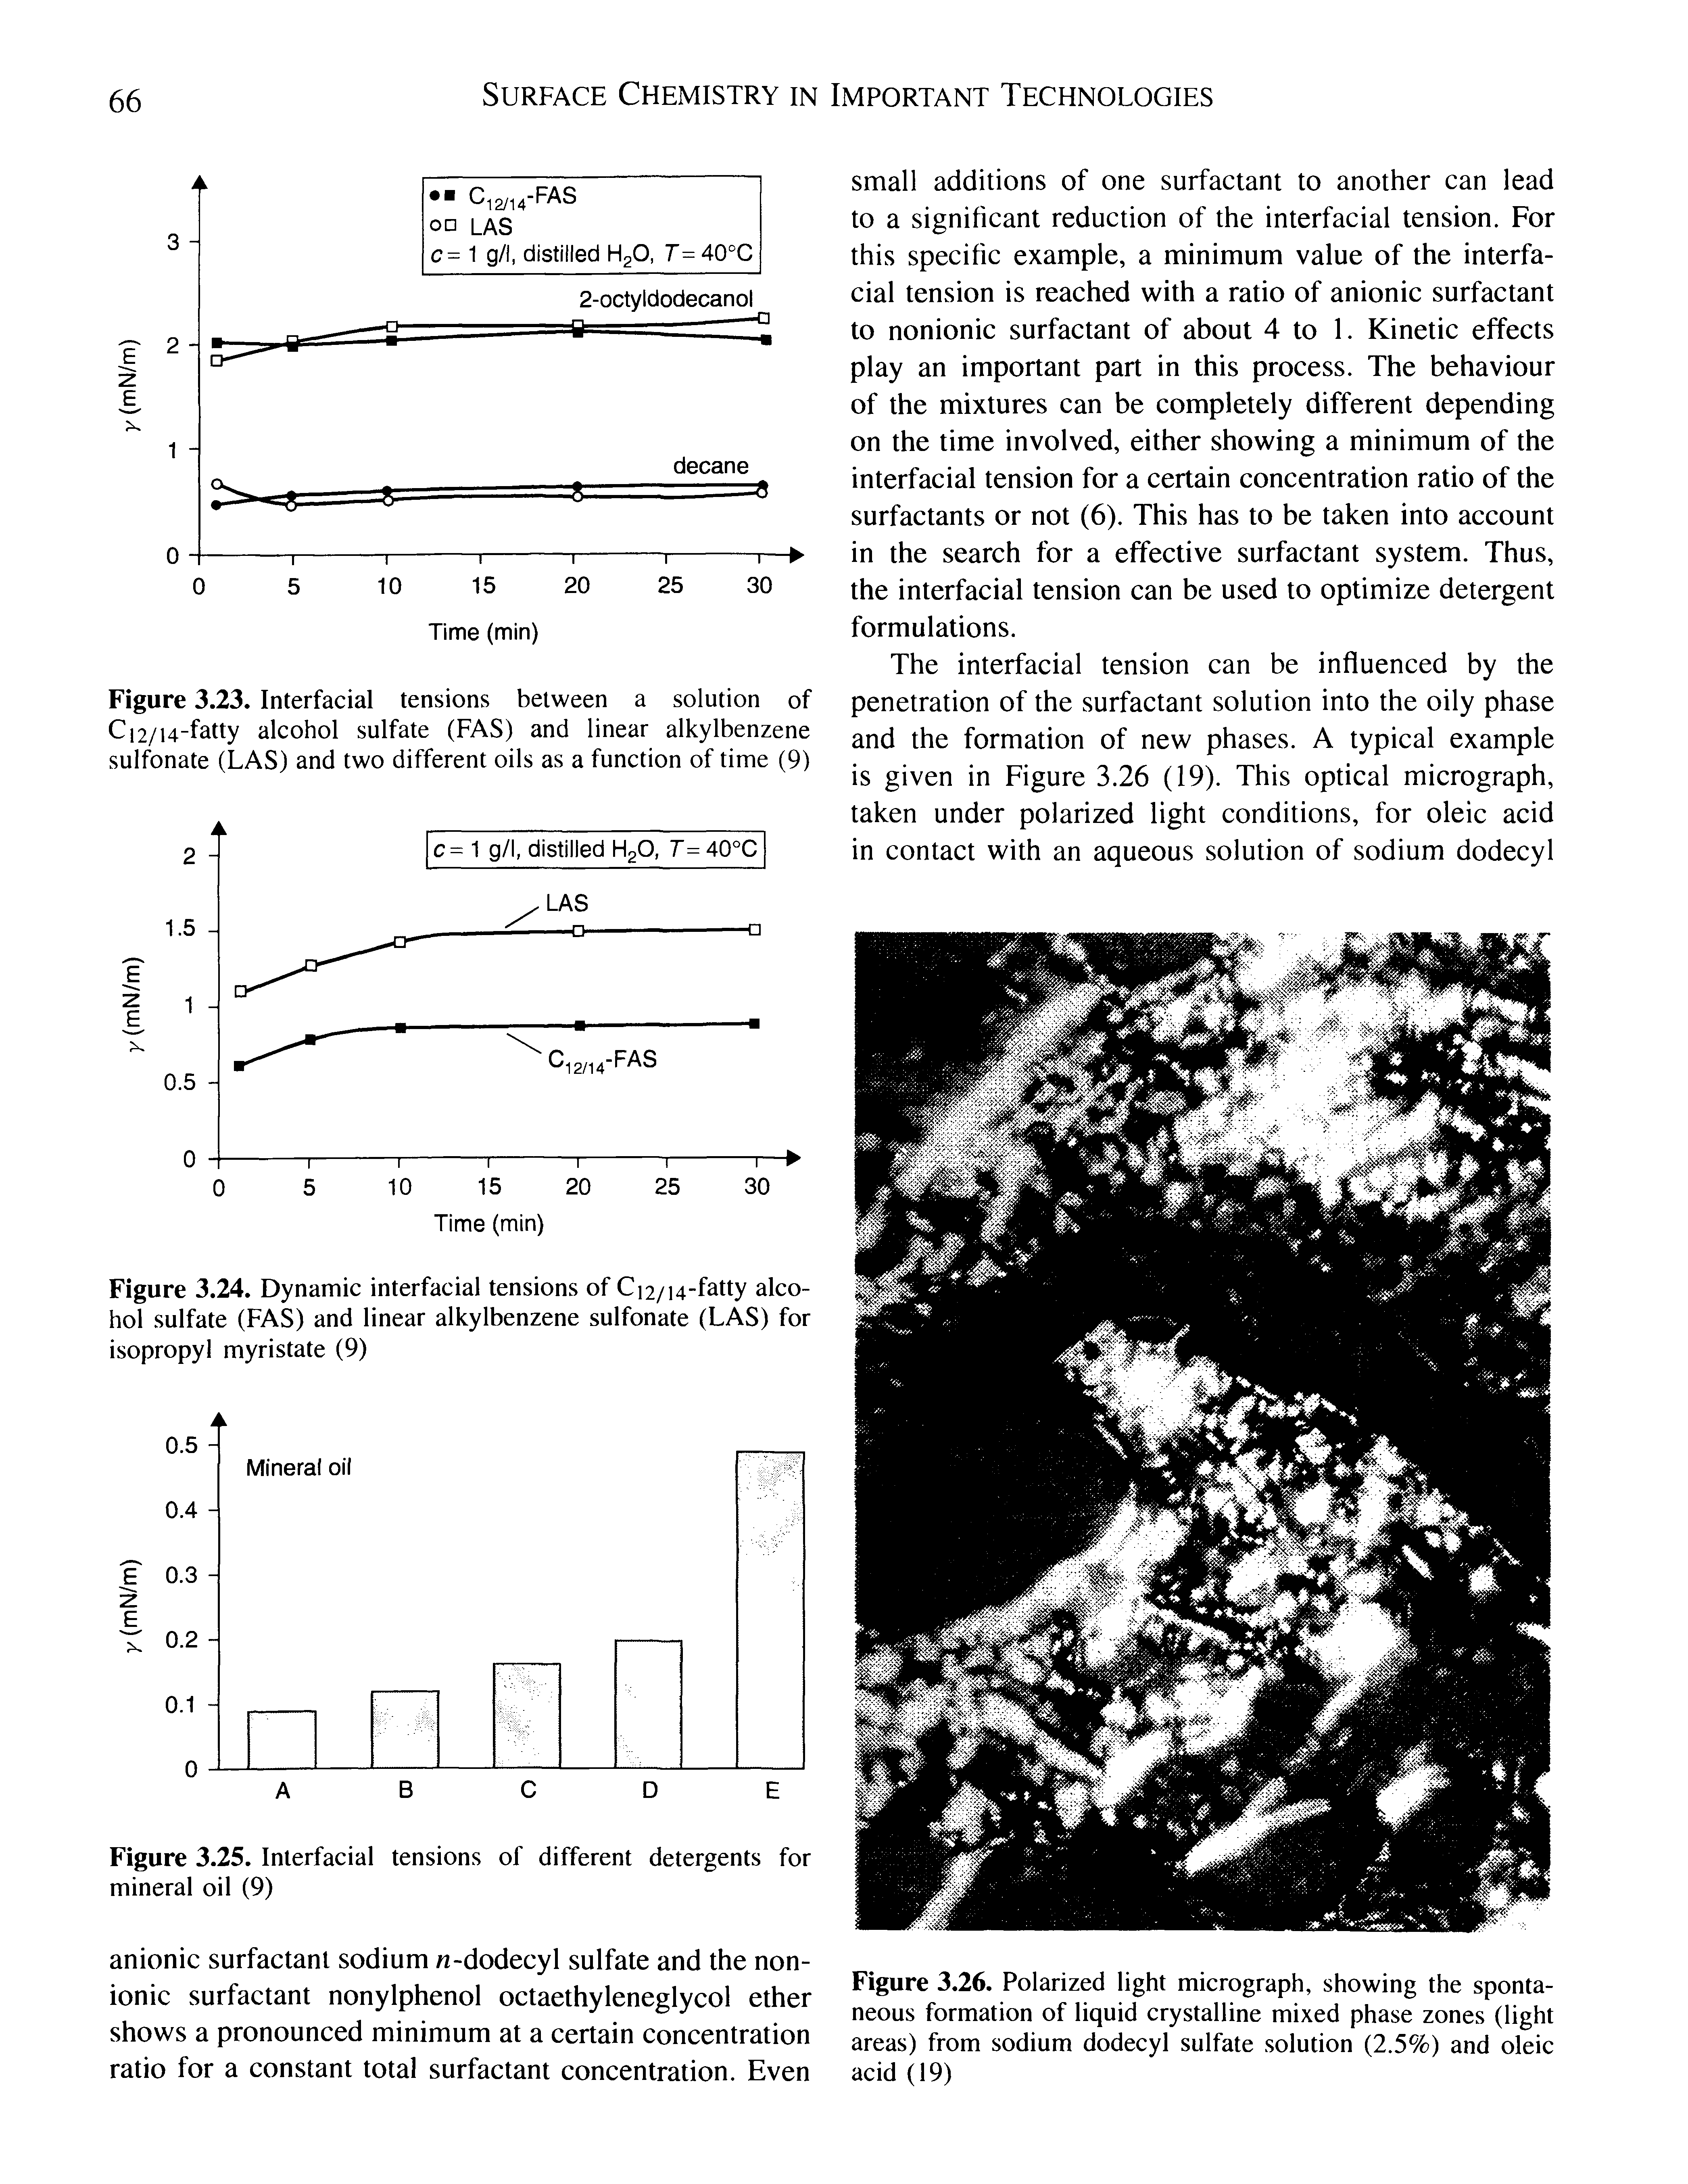 Figure 3.26. Polarized light micrograph, showing the spontaneous formation of liquid crystalline mixed phase zones (light areas) from sodium dodecyl sulfate solution (2.5%) and oleic acid (19)...